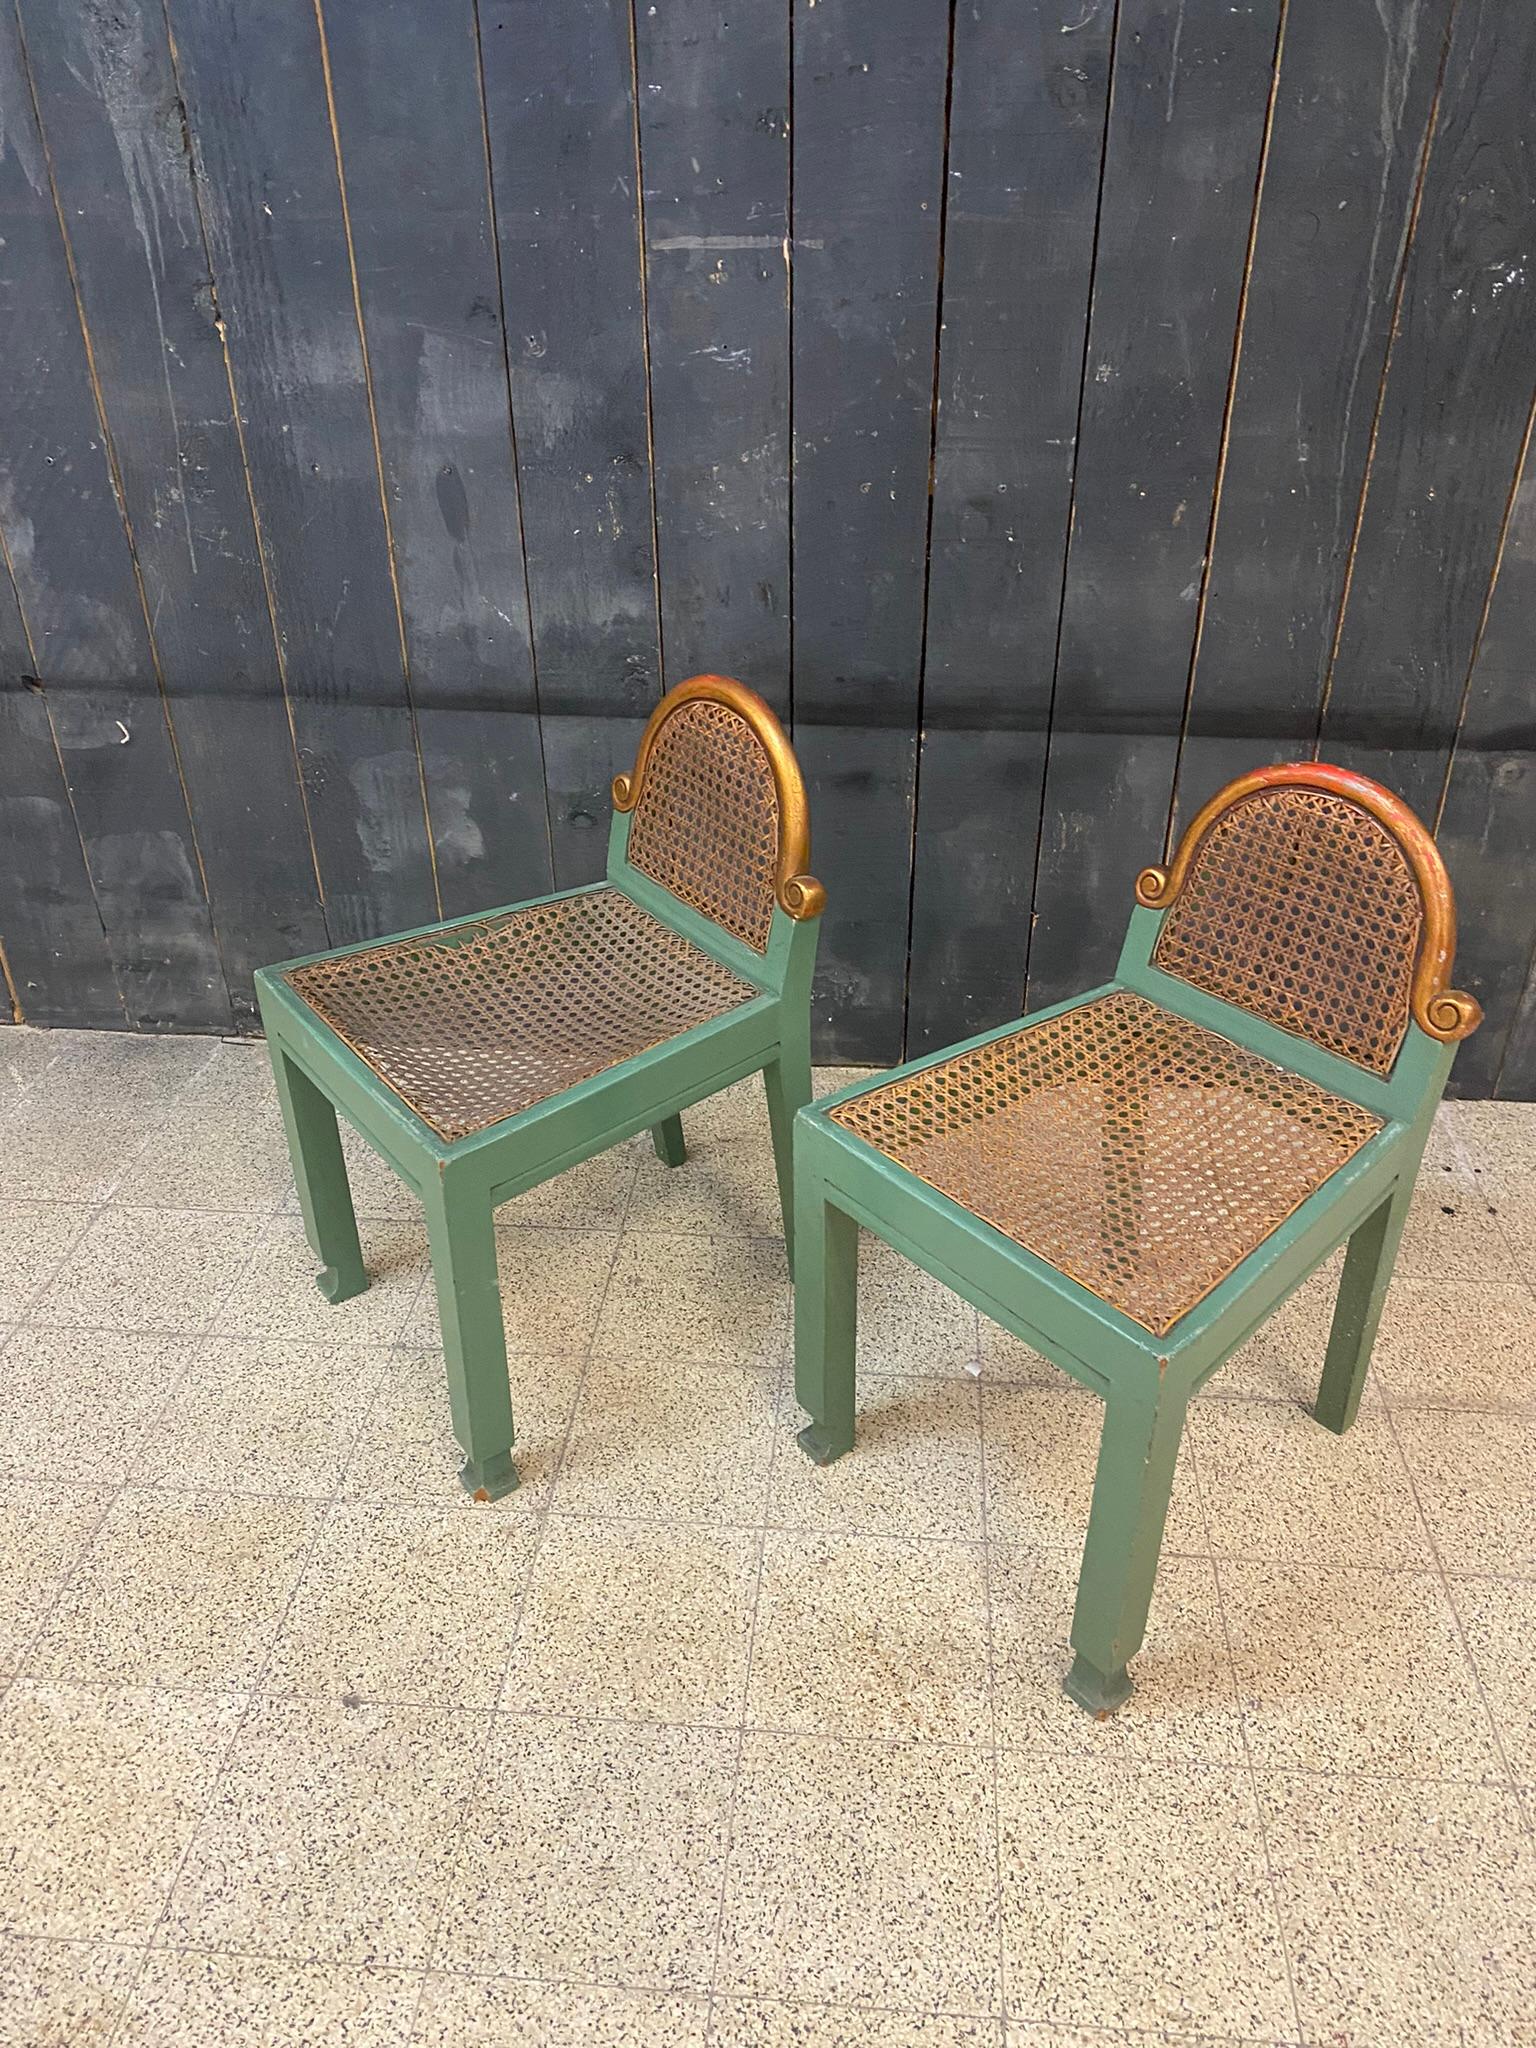 Pair of Small Modernist Chairs in Lacquered Beech and Cane, Belgium circa 1925 For Sale 9